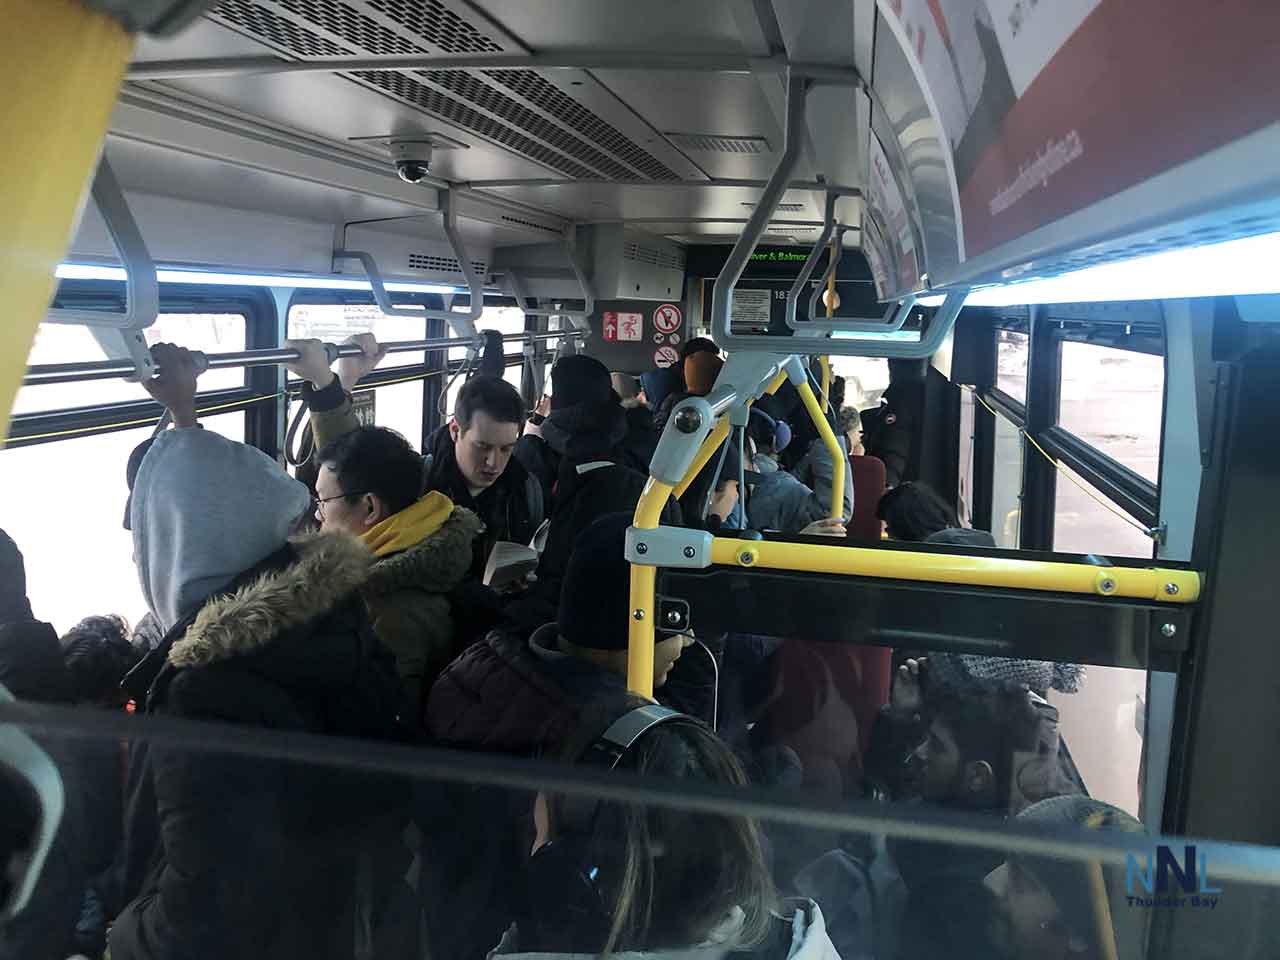 A Very Crowded Thunder Bay Transit bus on the Crosstown Route